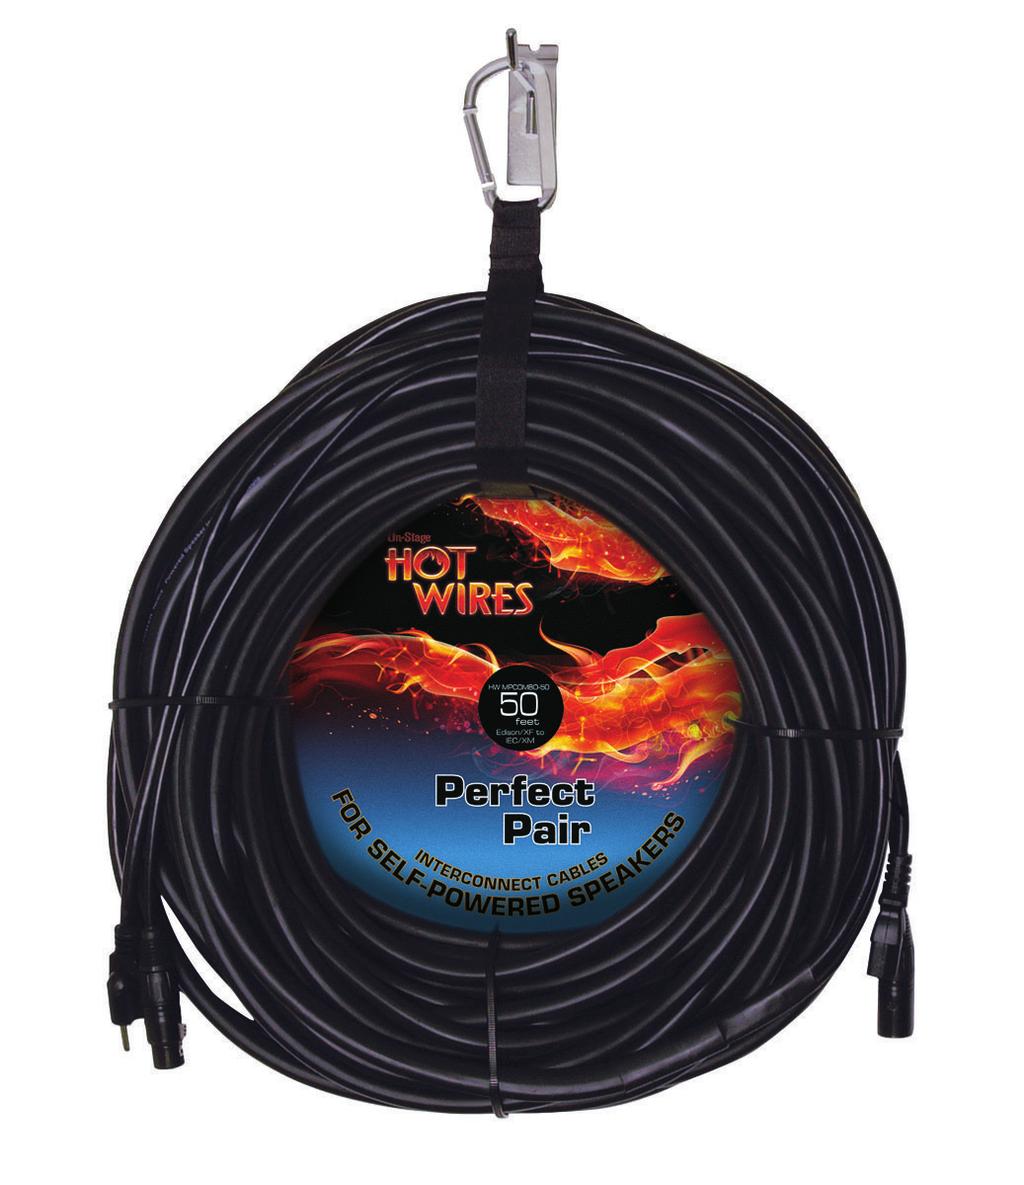 CABLES & COUPLERS CABLES Hot Wires Pro Microphone Cables Hot Wires Speaker Cables Quality microphone cables are vital to a clean, reliable audio system.